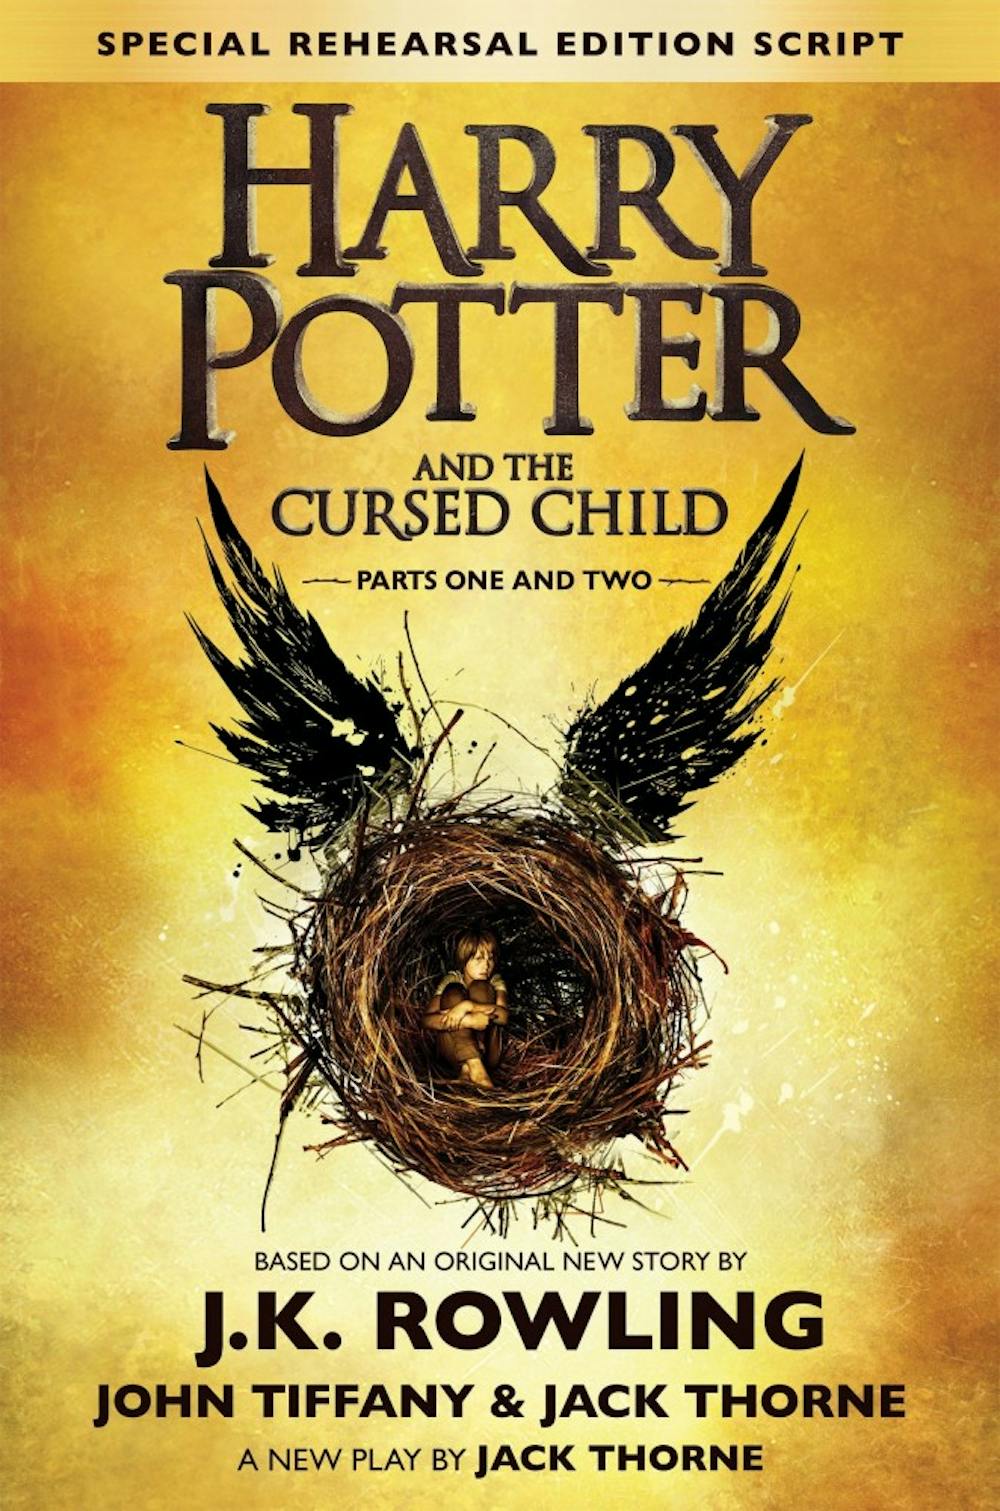 <p>"Harry Potter and the Cursed Child" is a screenplay written by Jack Thorne and inspired by a short story by J. K. Rowling.</p>